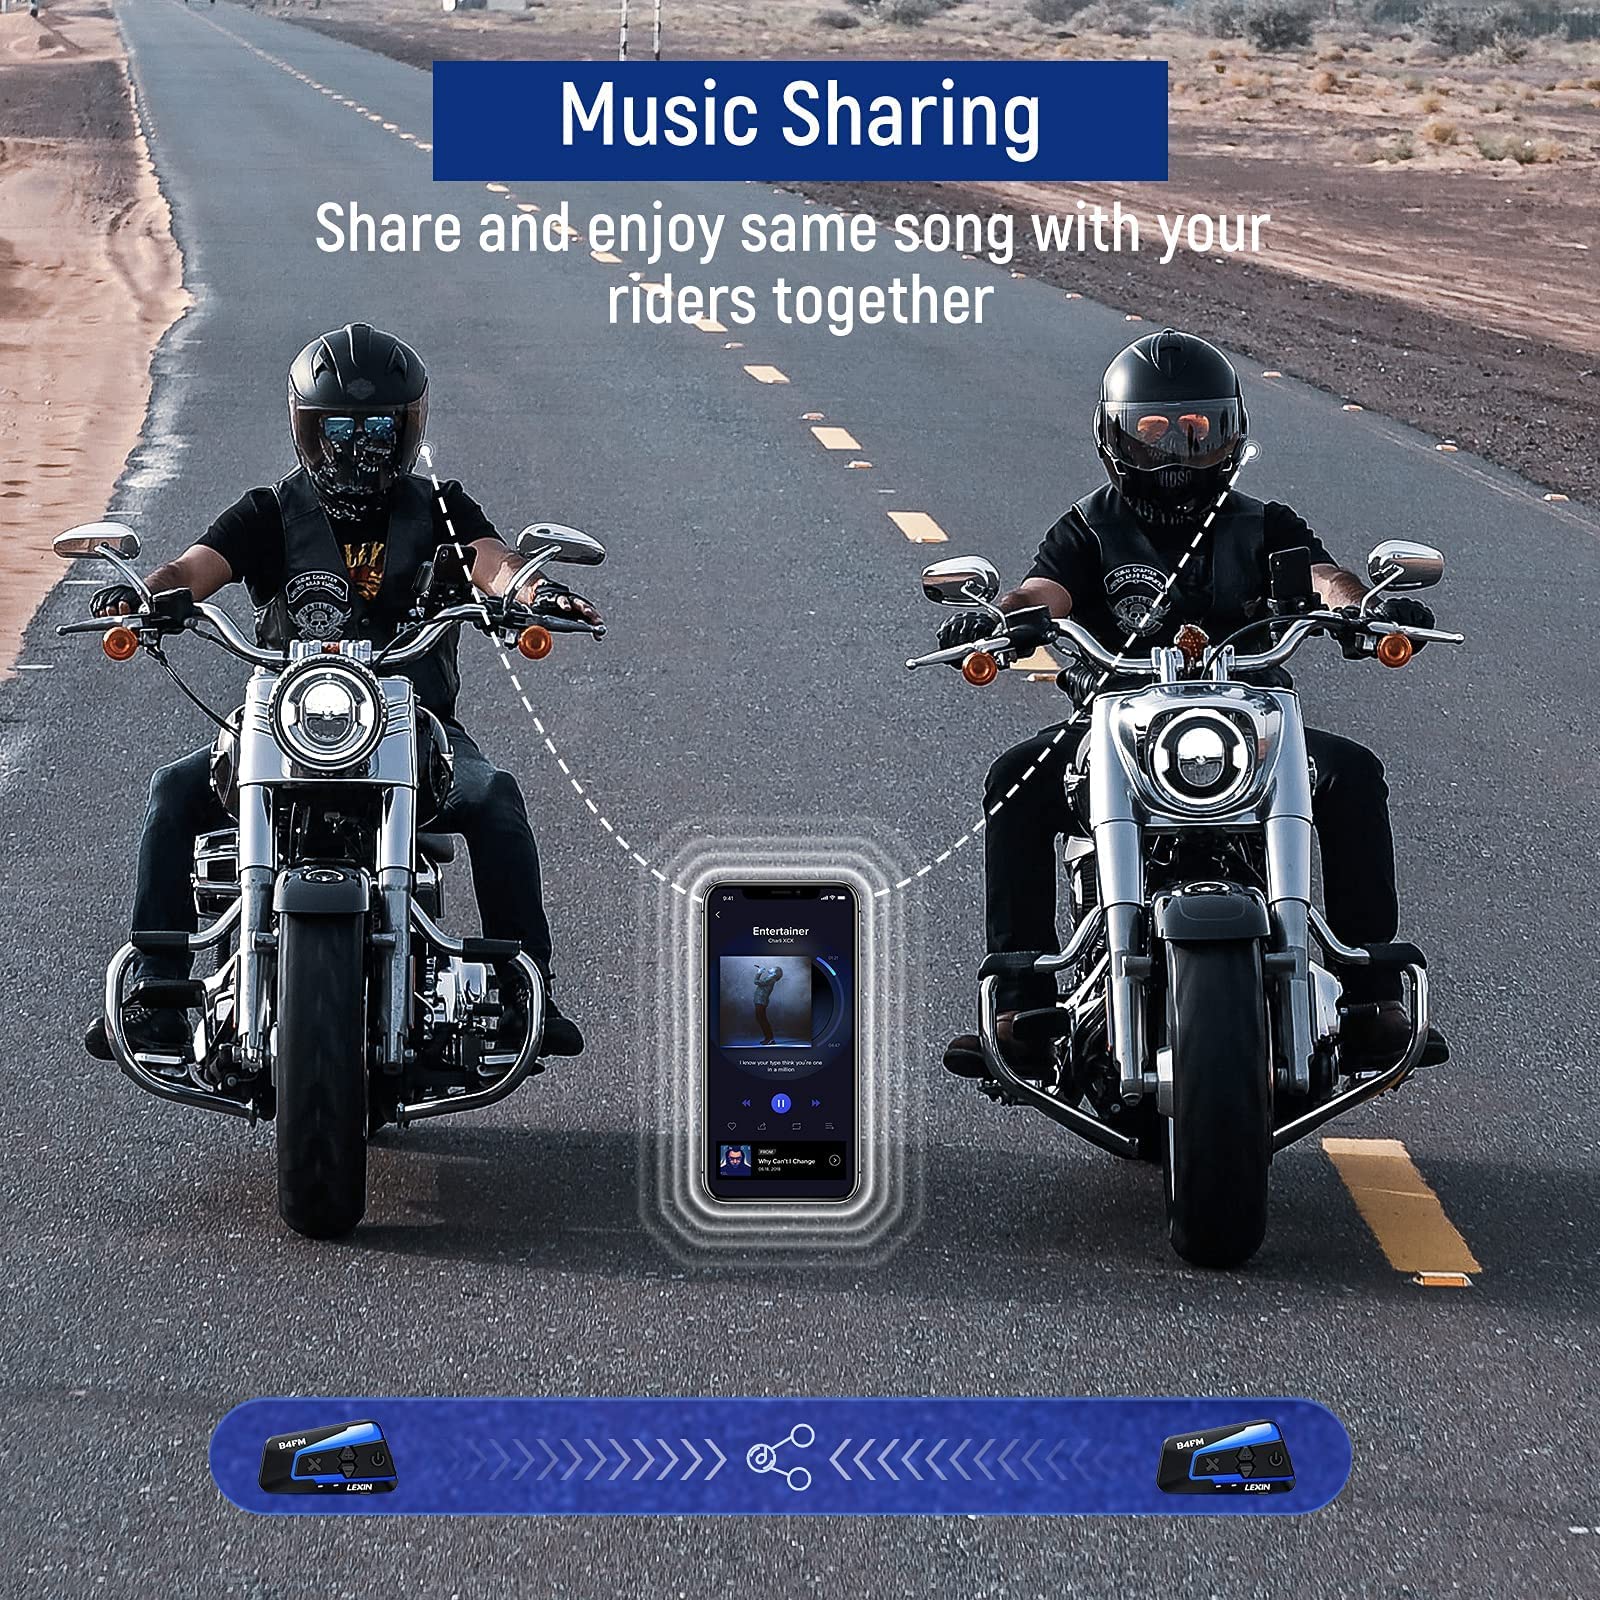 LEXIN 2pcs B4FM 10 Riders Motorcycle Bluetooth Headset with Music Sharing, Helmet Bluetooth Intercom with Noise Cancellation/FM Radio, Universal Communication Systems for Snowmobile/ATV/Dirt Bike